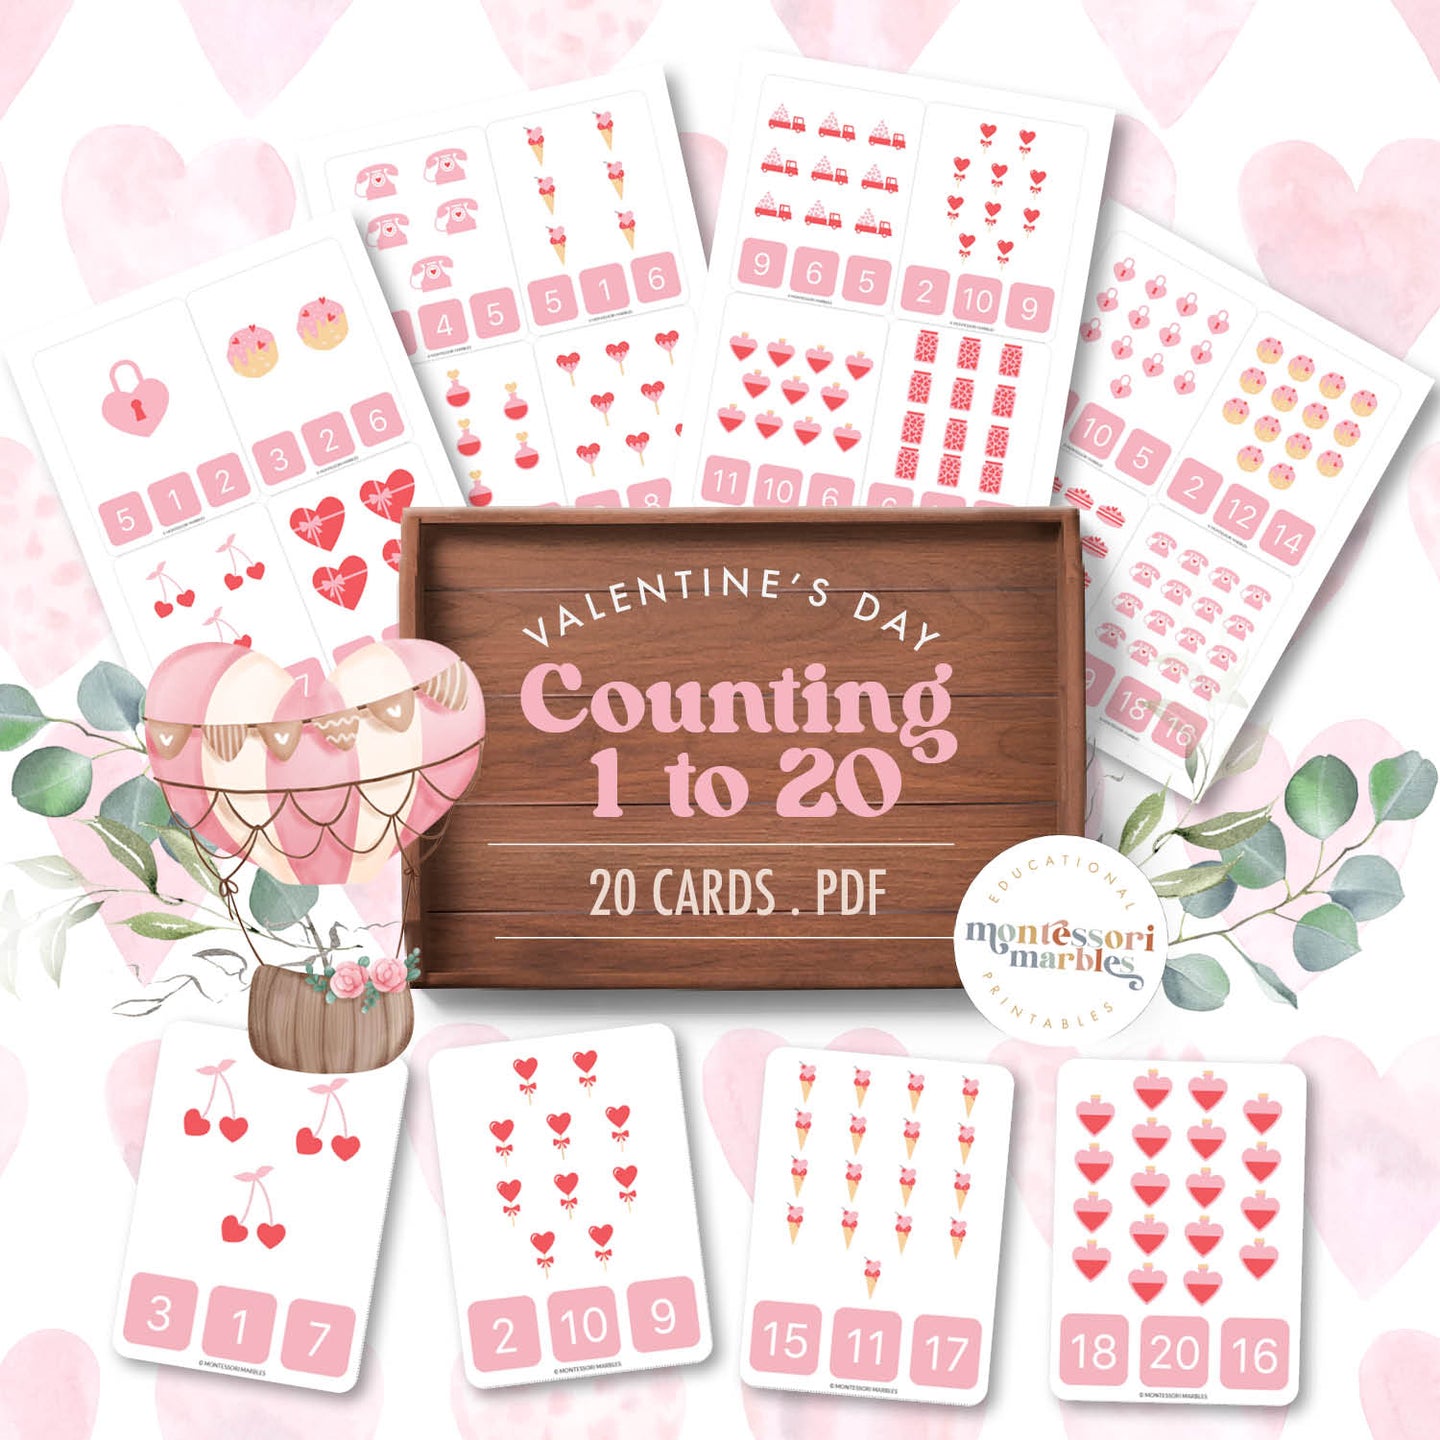 Valentine's Day Counting 1 to 20